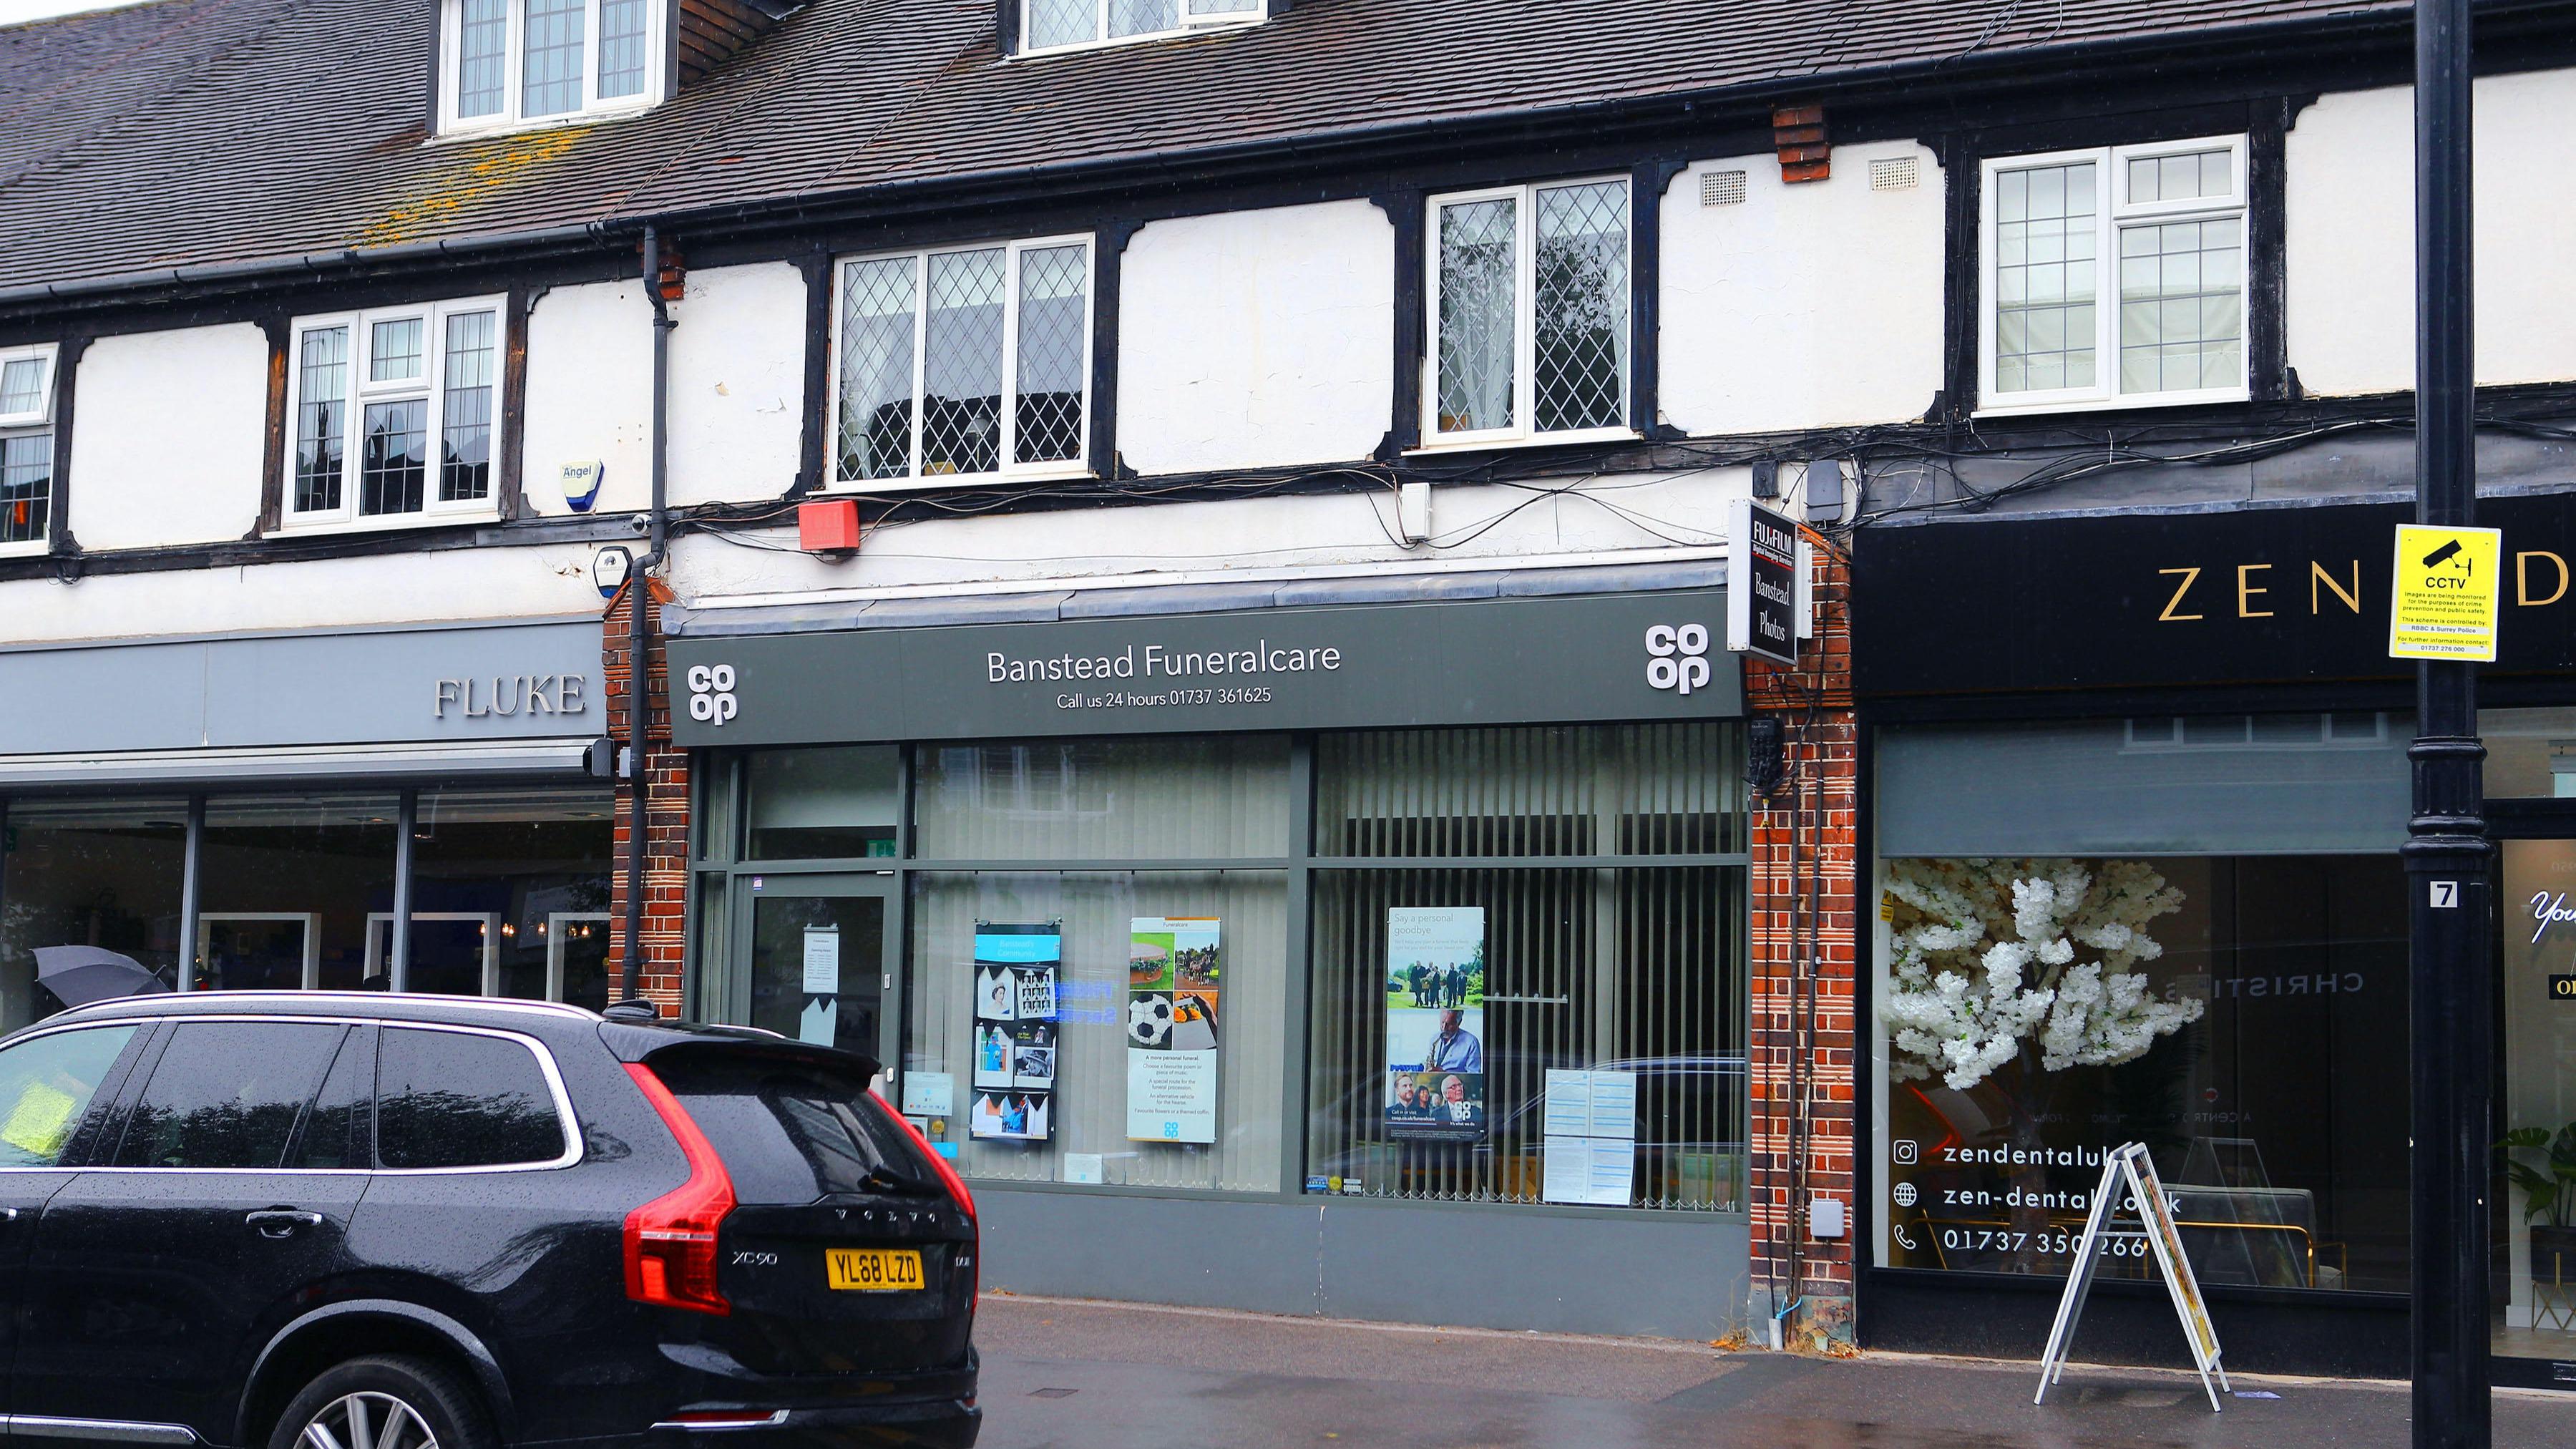 Images Banstead Funeralcare